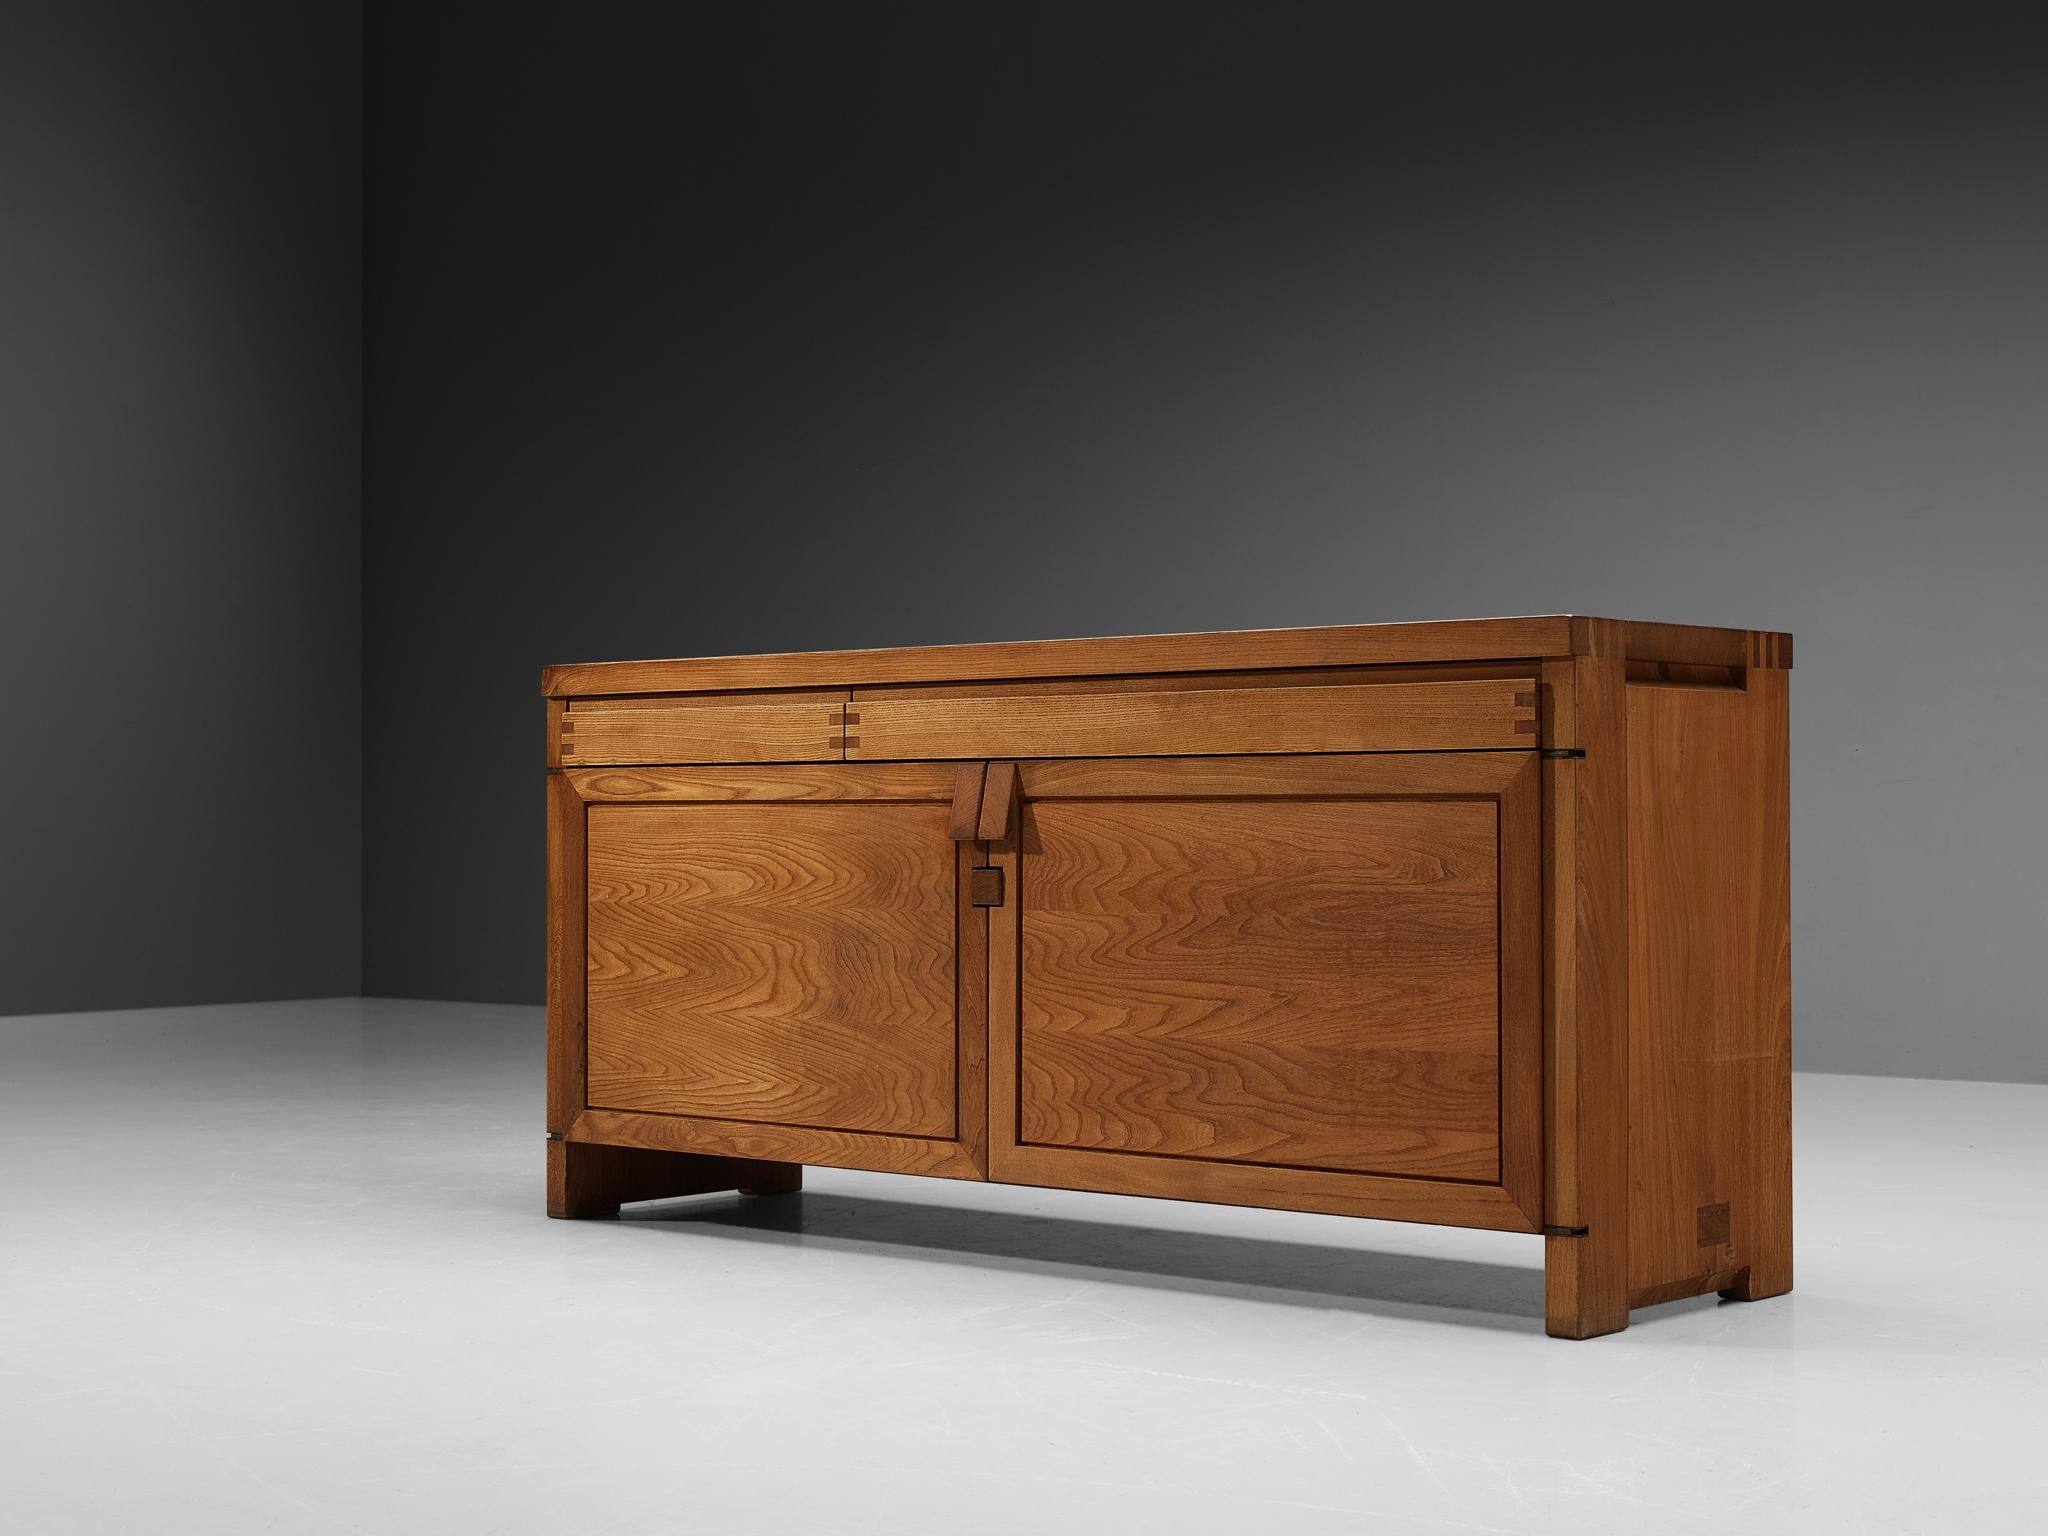 Pierre Chapo, sideboard, model 'R08', elm, France, circa 1964.

This design is an early edition, created according to the original craft methodology of Pierre Chapo. This exquisitely crafted credenza combines a simplified yet complex design combined